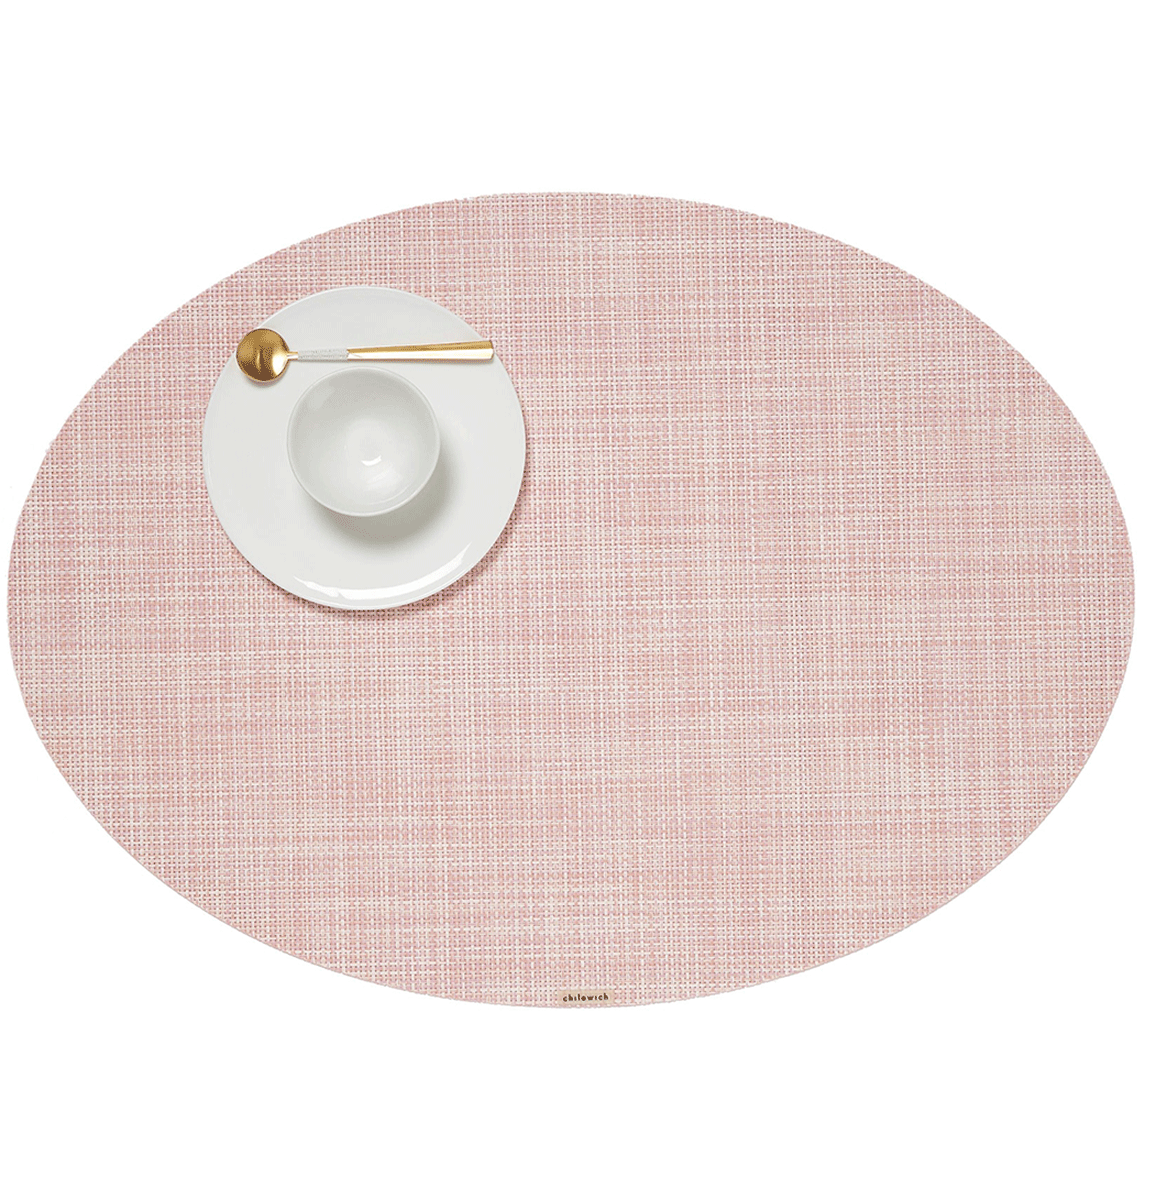 Mini Basketweave Placemat - Oval